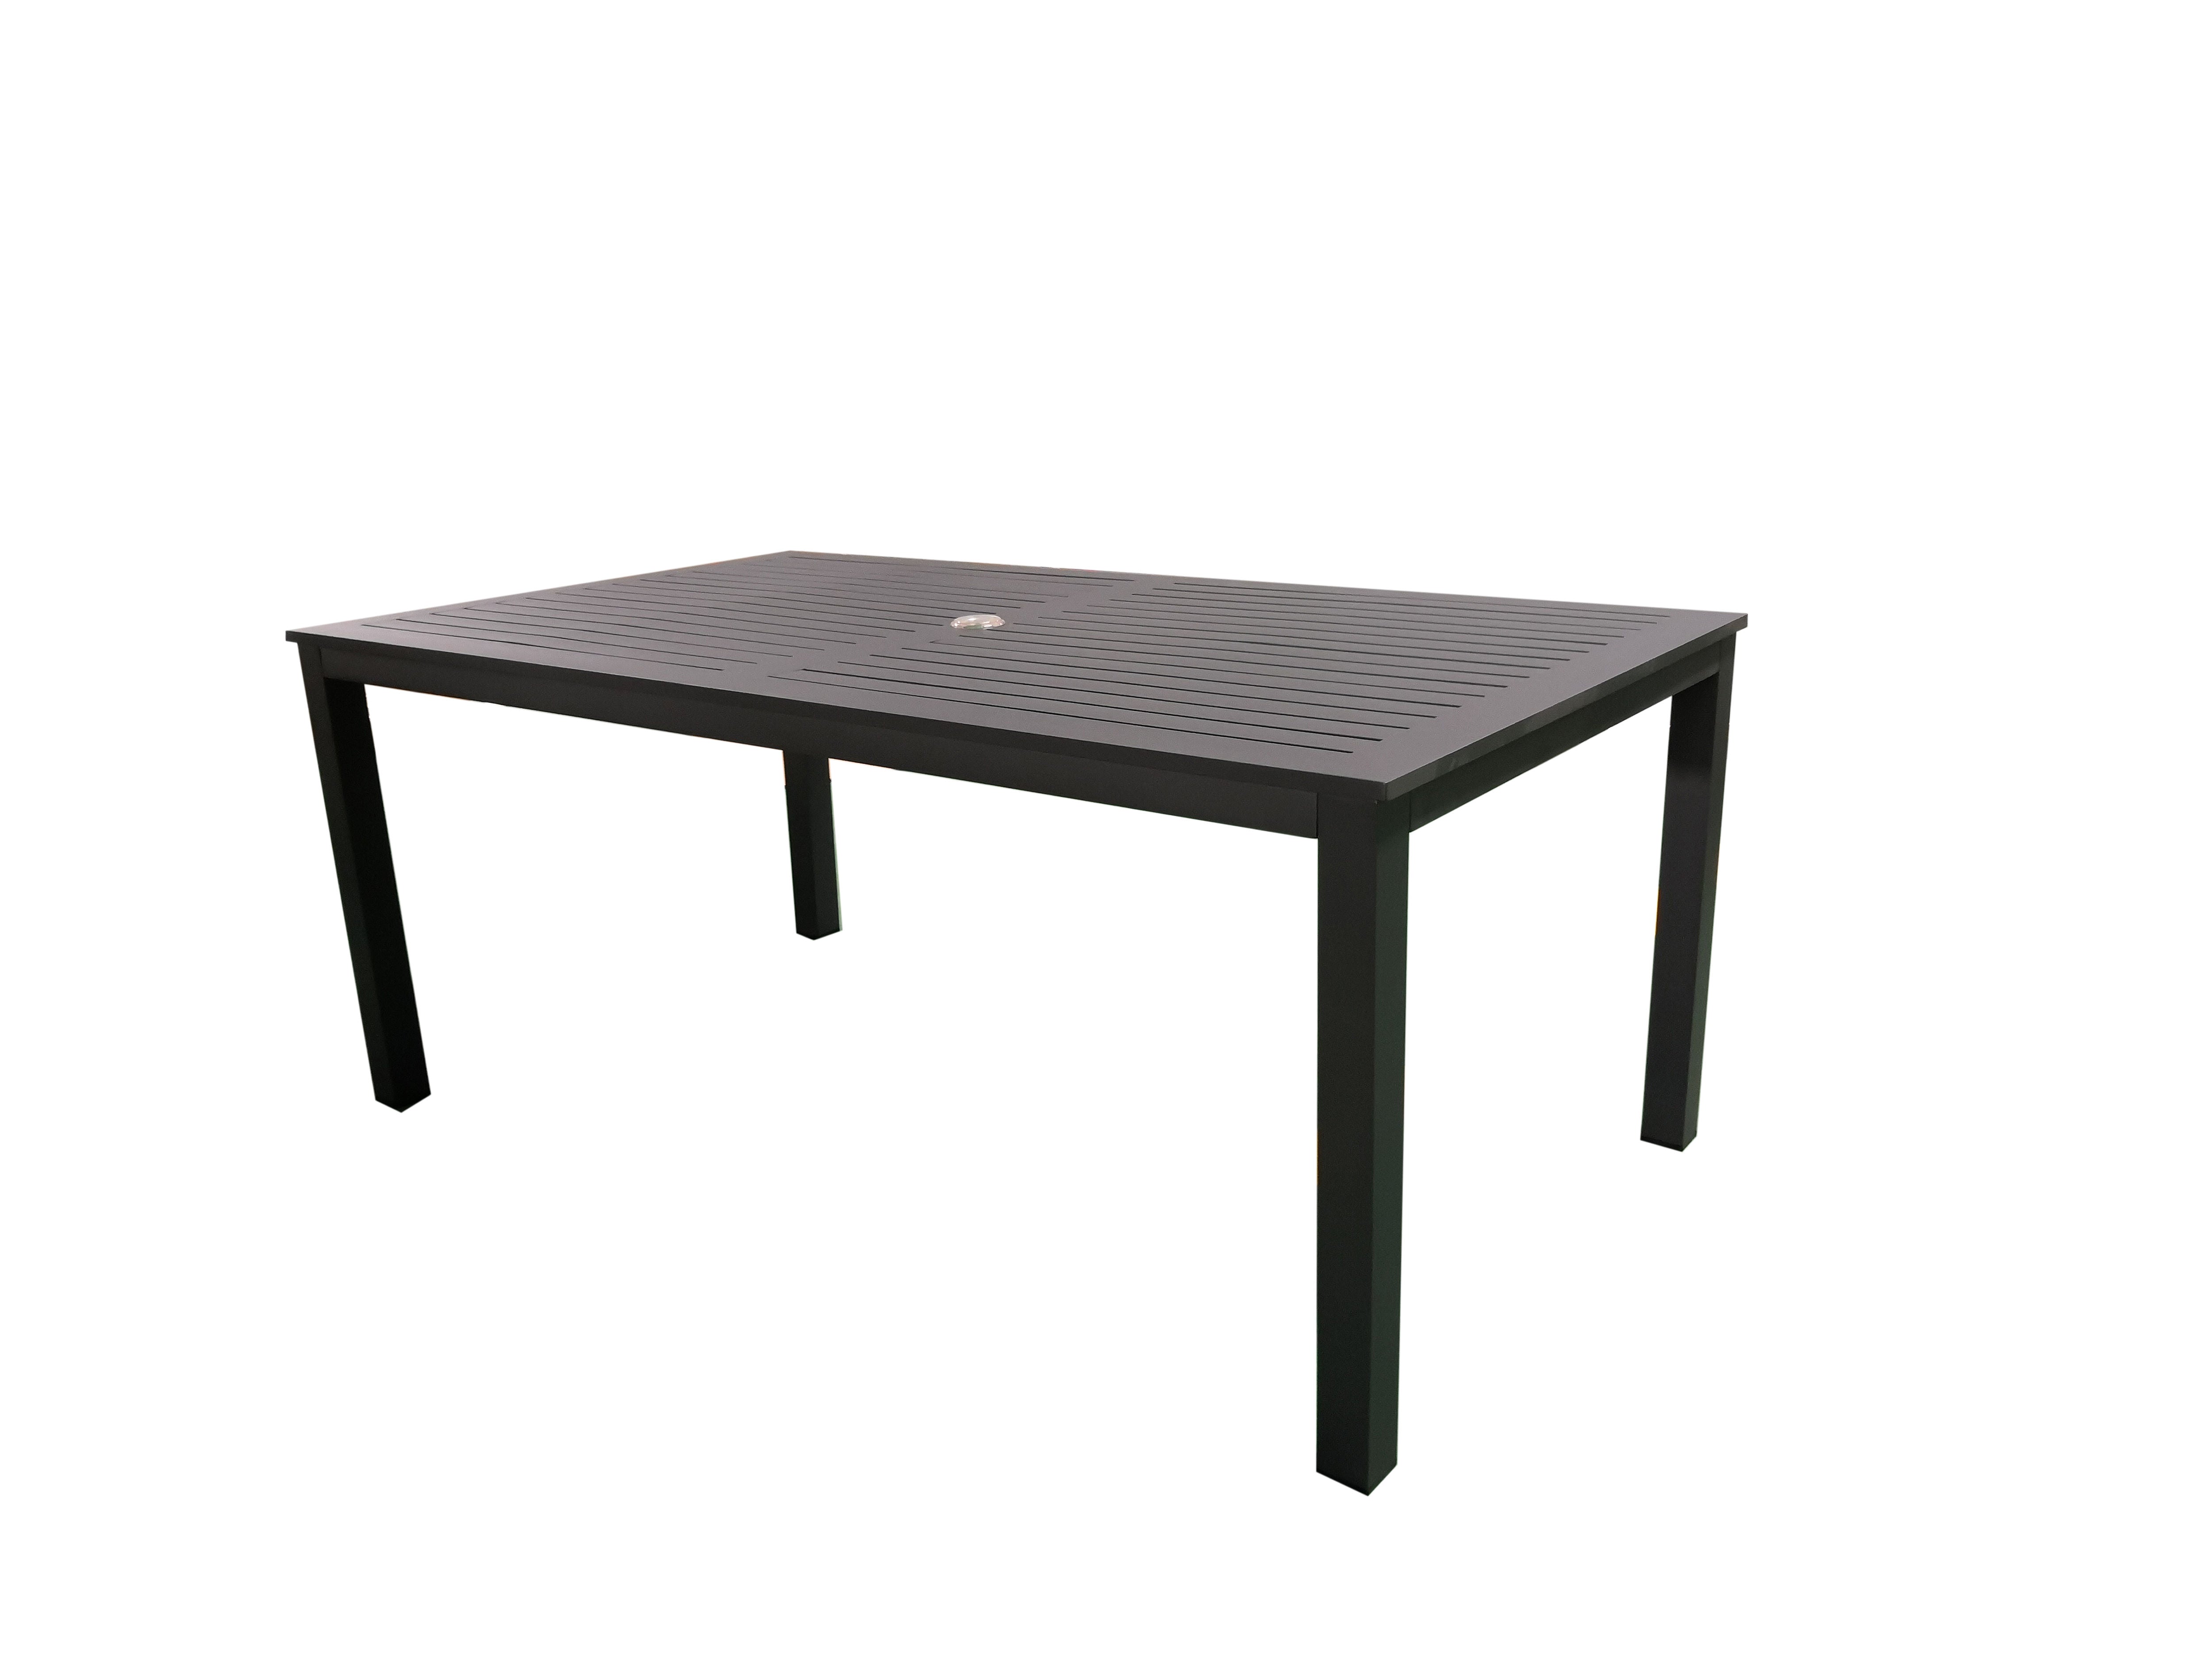 PatioZone Dining Table with Slated Tabletop w/Umbrella Hole in Middle and Aluminum Frame (MOSS-T297C) - Matte Charcoal